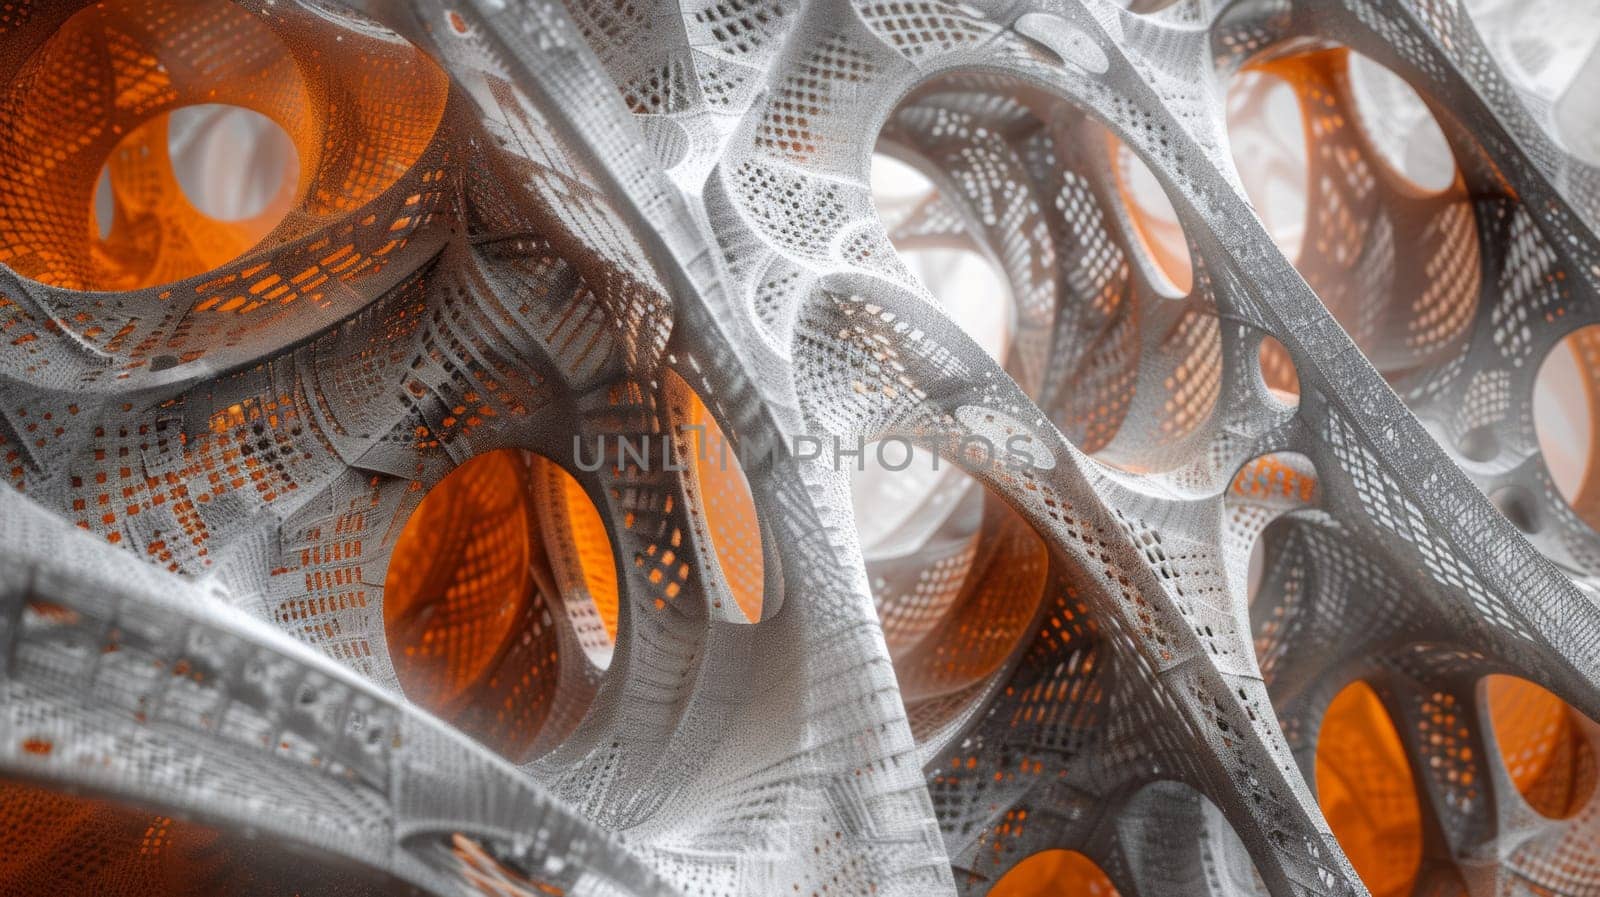 A close up of a sculpture made out of metal and orange circles